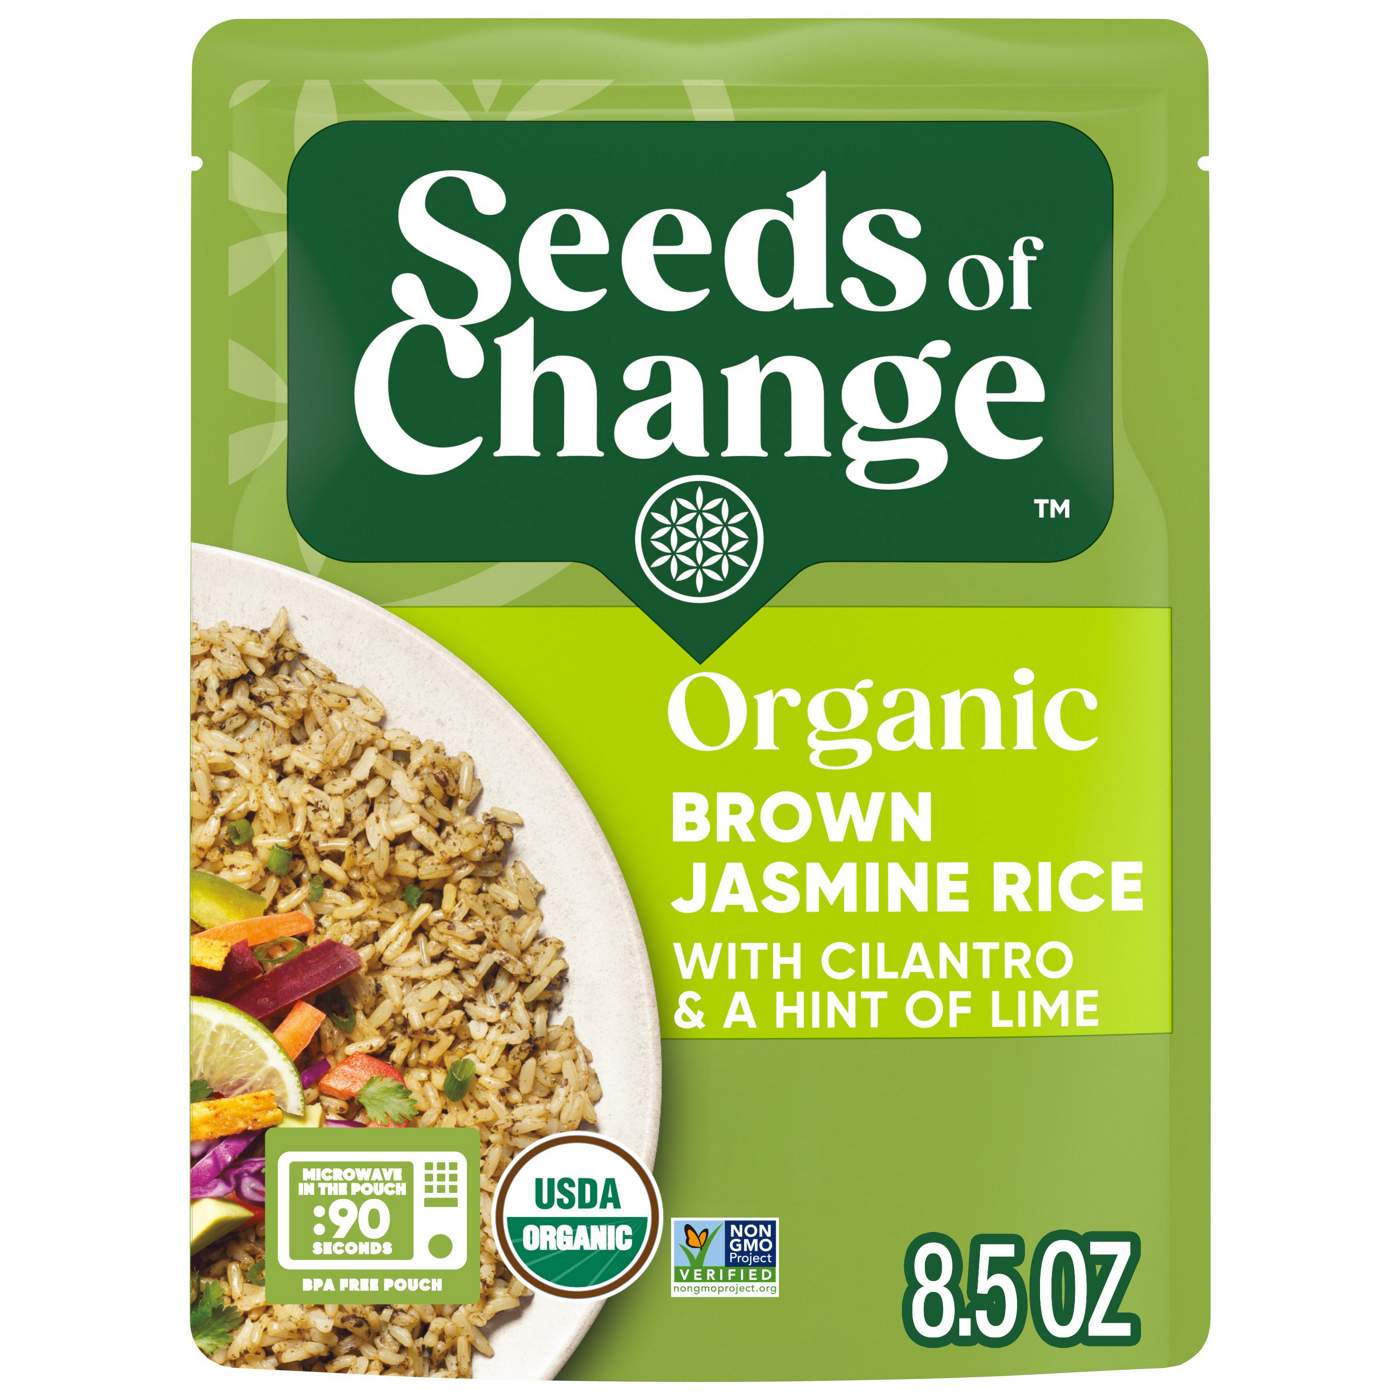 Seeds of Change Organic Brown Jasmine Rice with Cilantro Lime; image 1 of 9